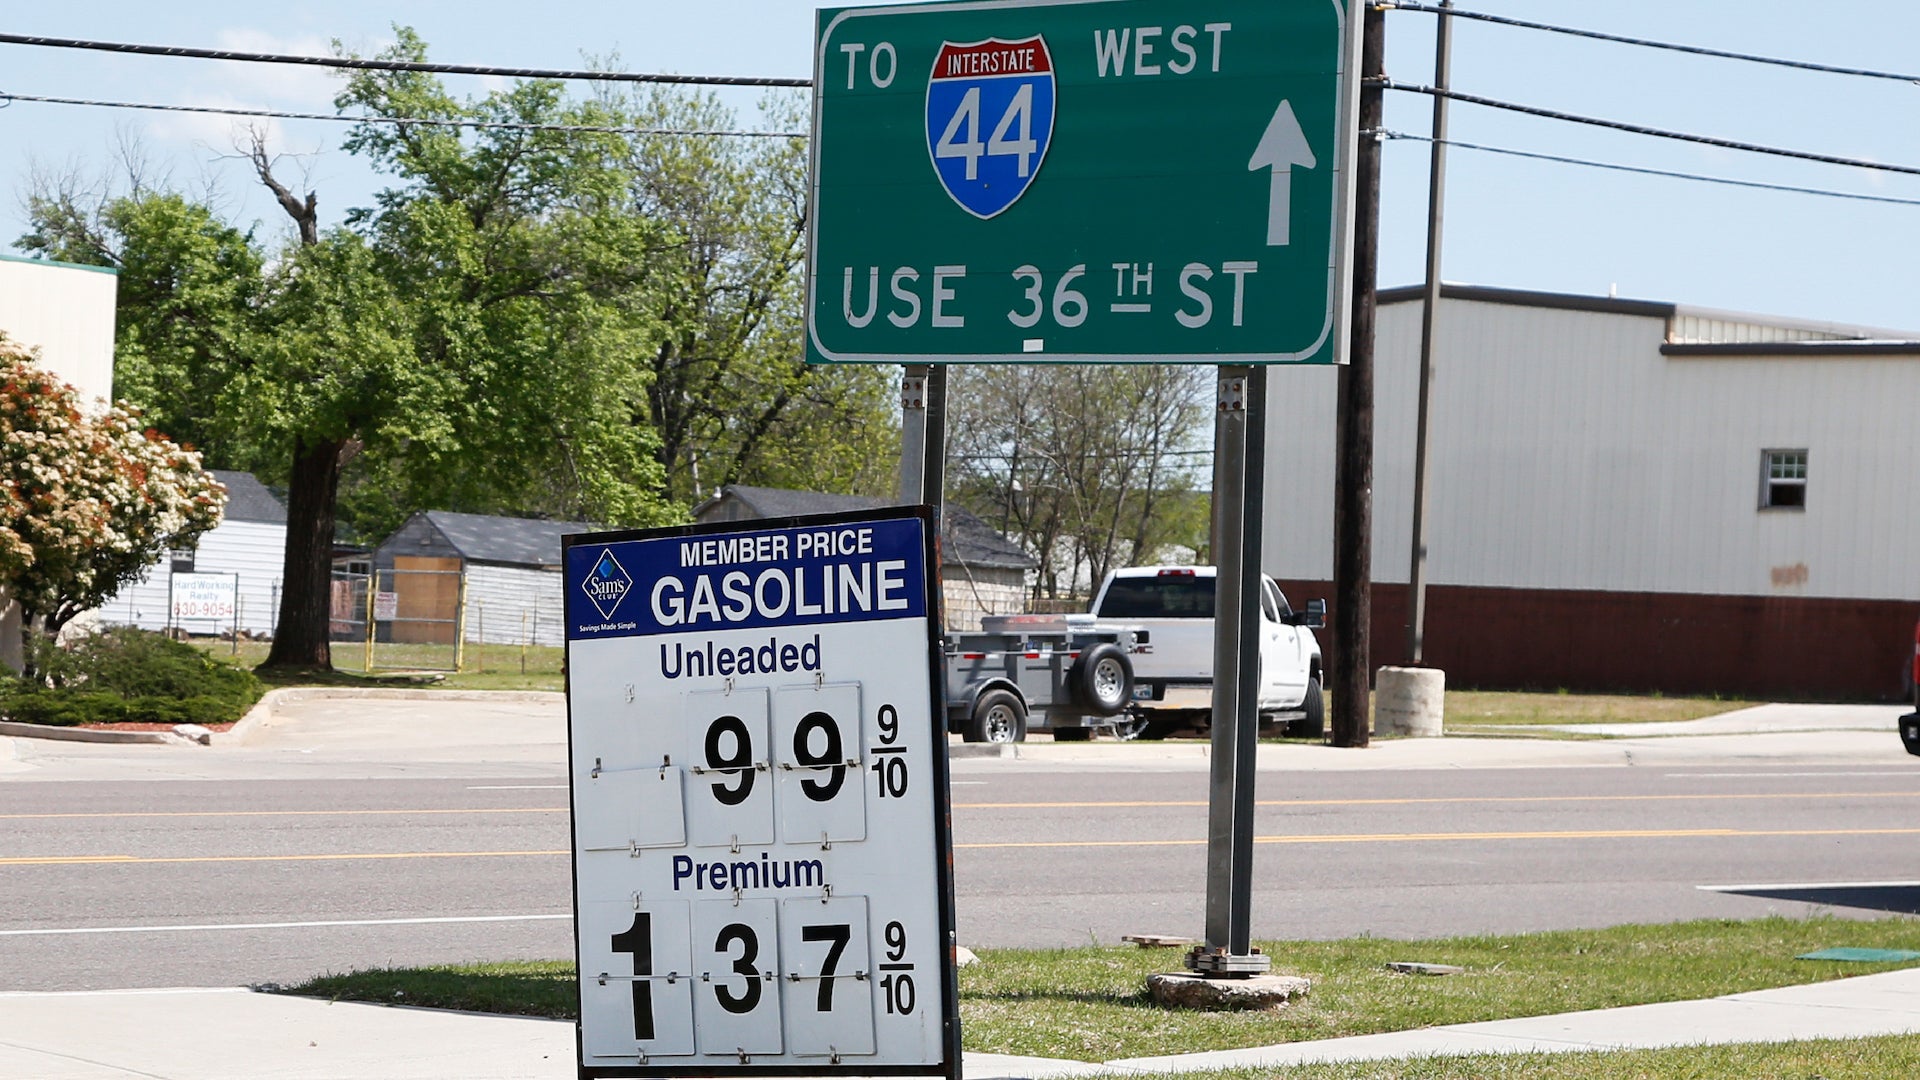 National Gas Price Average Drops to $1.80 Per Gallon, Lowest Since 2004